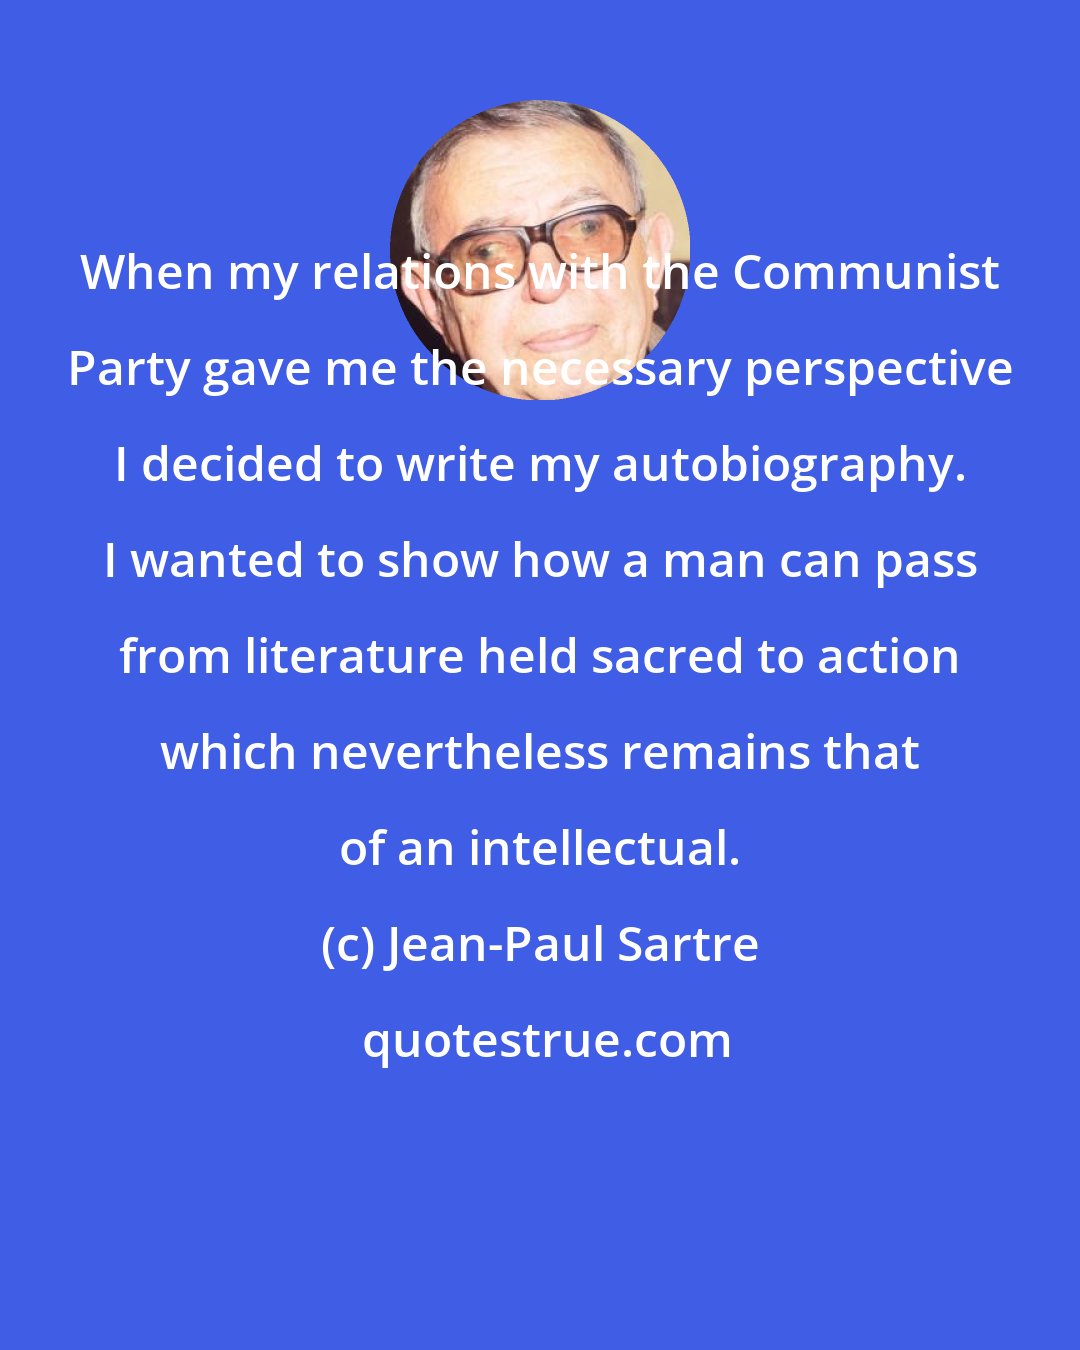 Jean-Paul Sartre: When my relations with the Communist Party gave me the necessary perspective I decided to write my autobiography. I wanted to show how a man can pass from literature held sacred to action which nevertheless remains that of an intellectual.